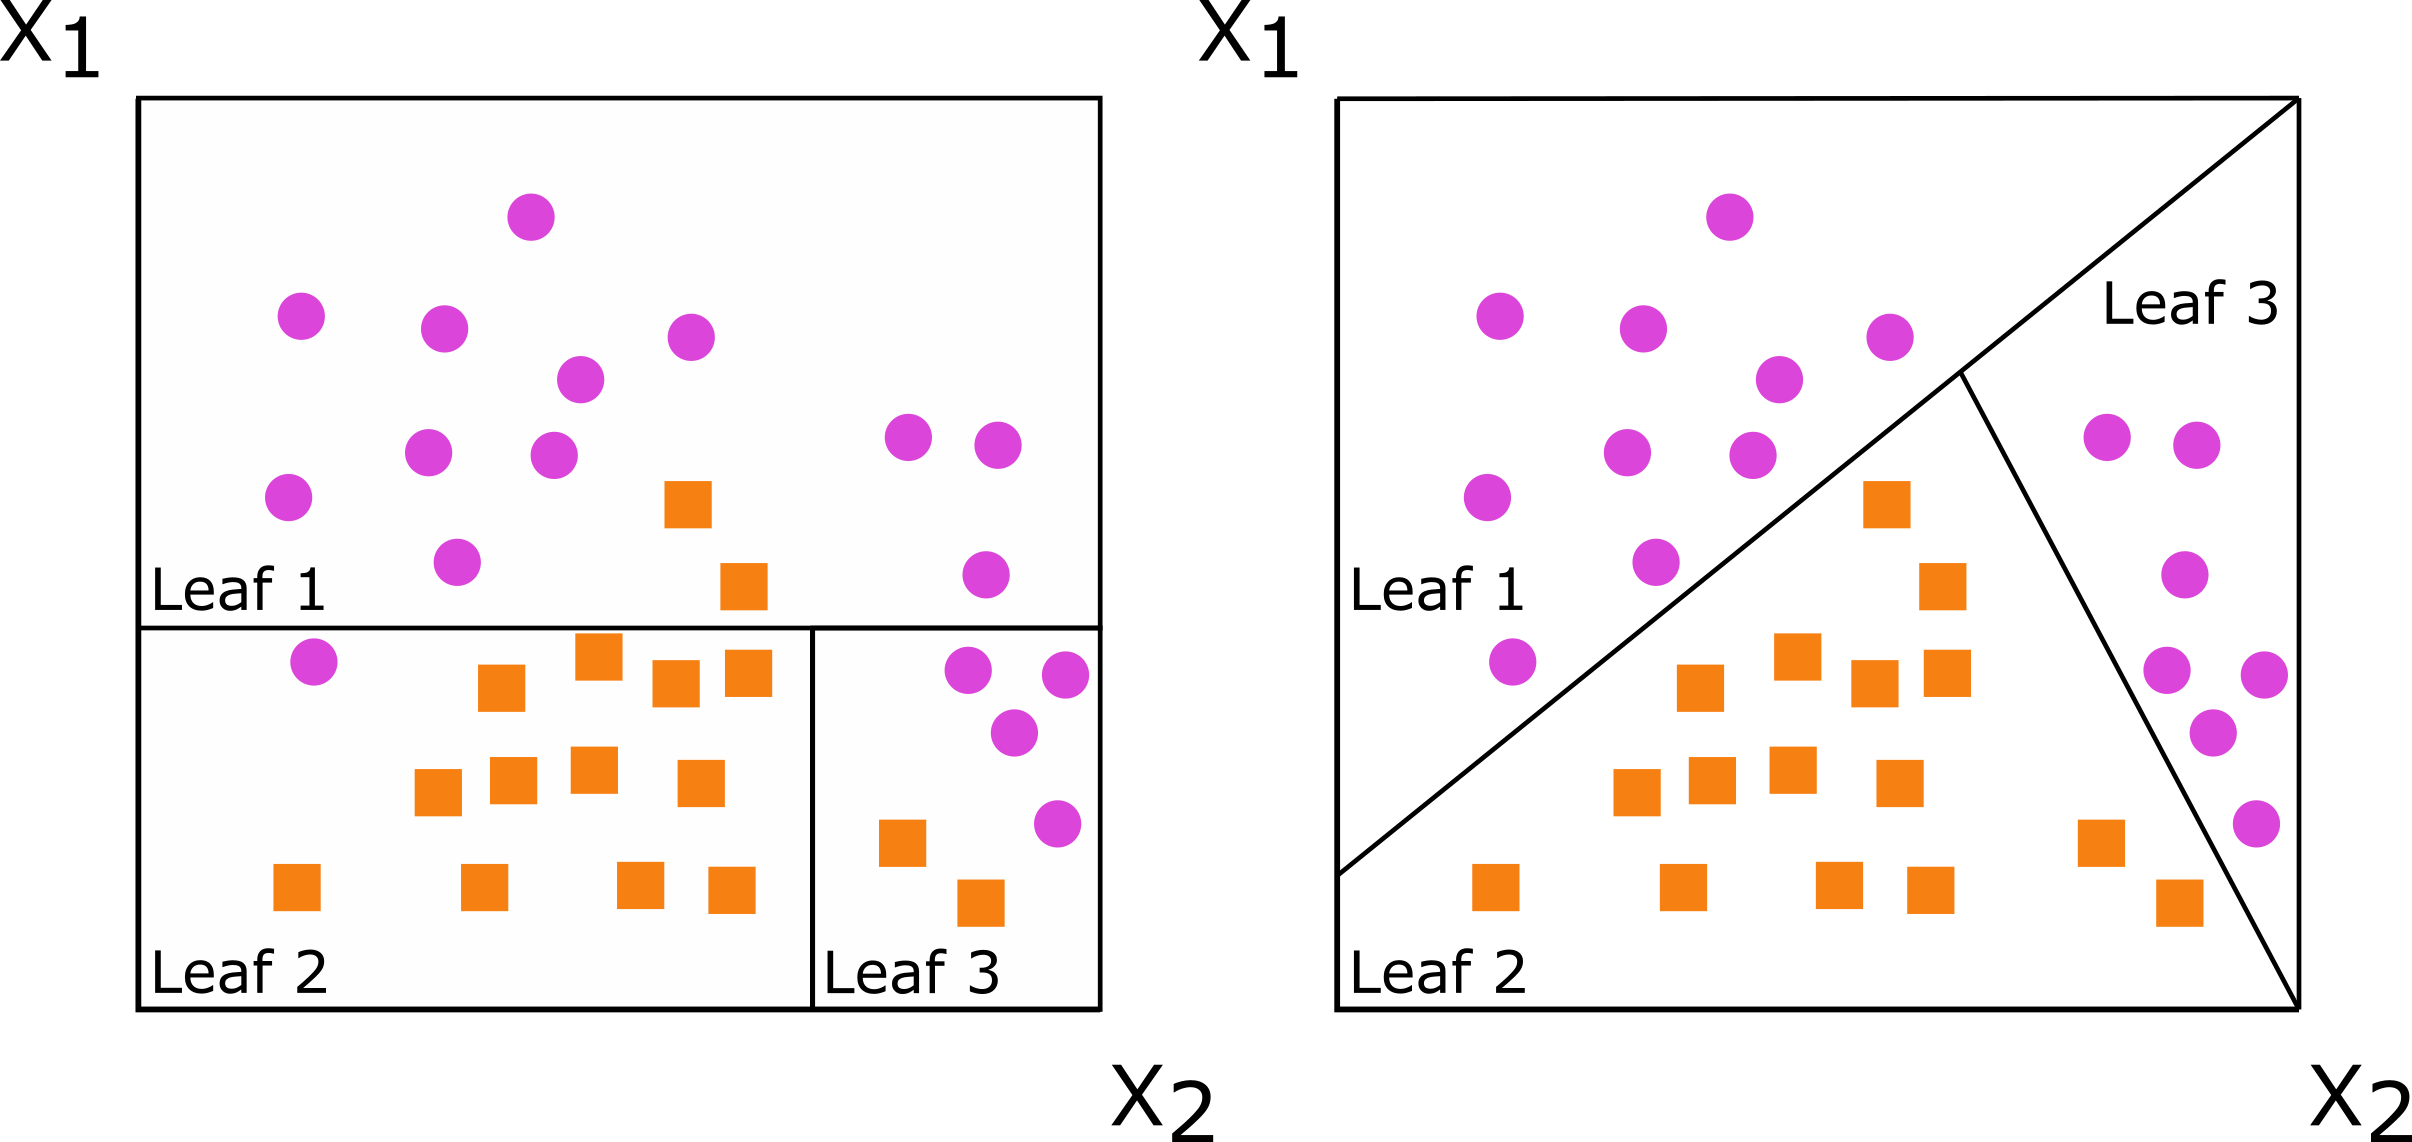 Two plots of decision boundaries for a classification problem. One uses single-variable splitting and the other oblique splitting. Both trees partition the predictor space defined by predictors X1 and X2, but the oblique splits do a better job of separating the two classes thanks to an 'oblique' boundary formed by considering both X1 and X2 at the same time.